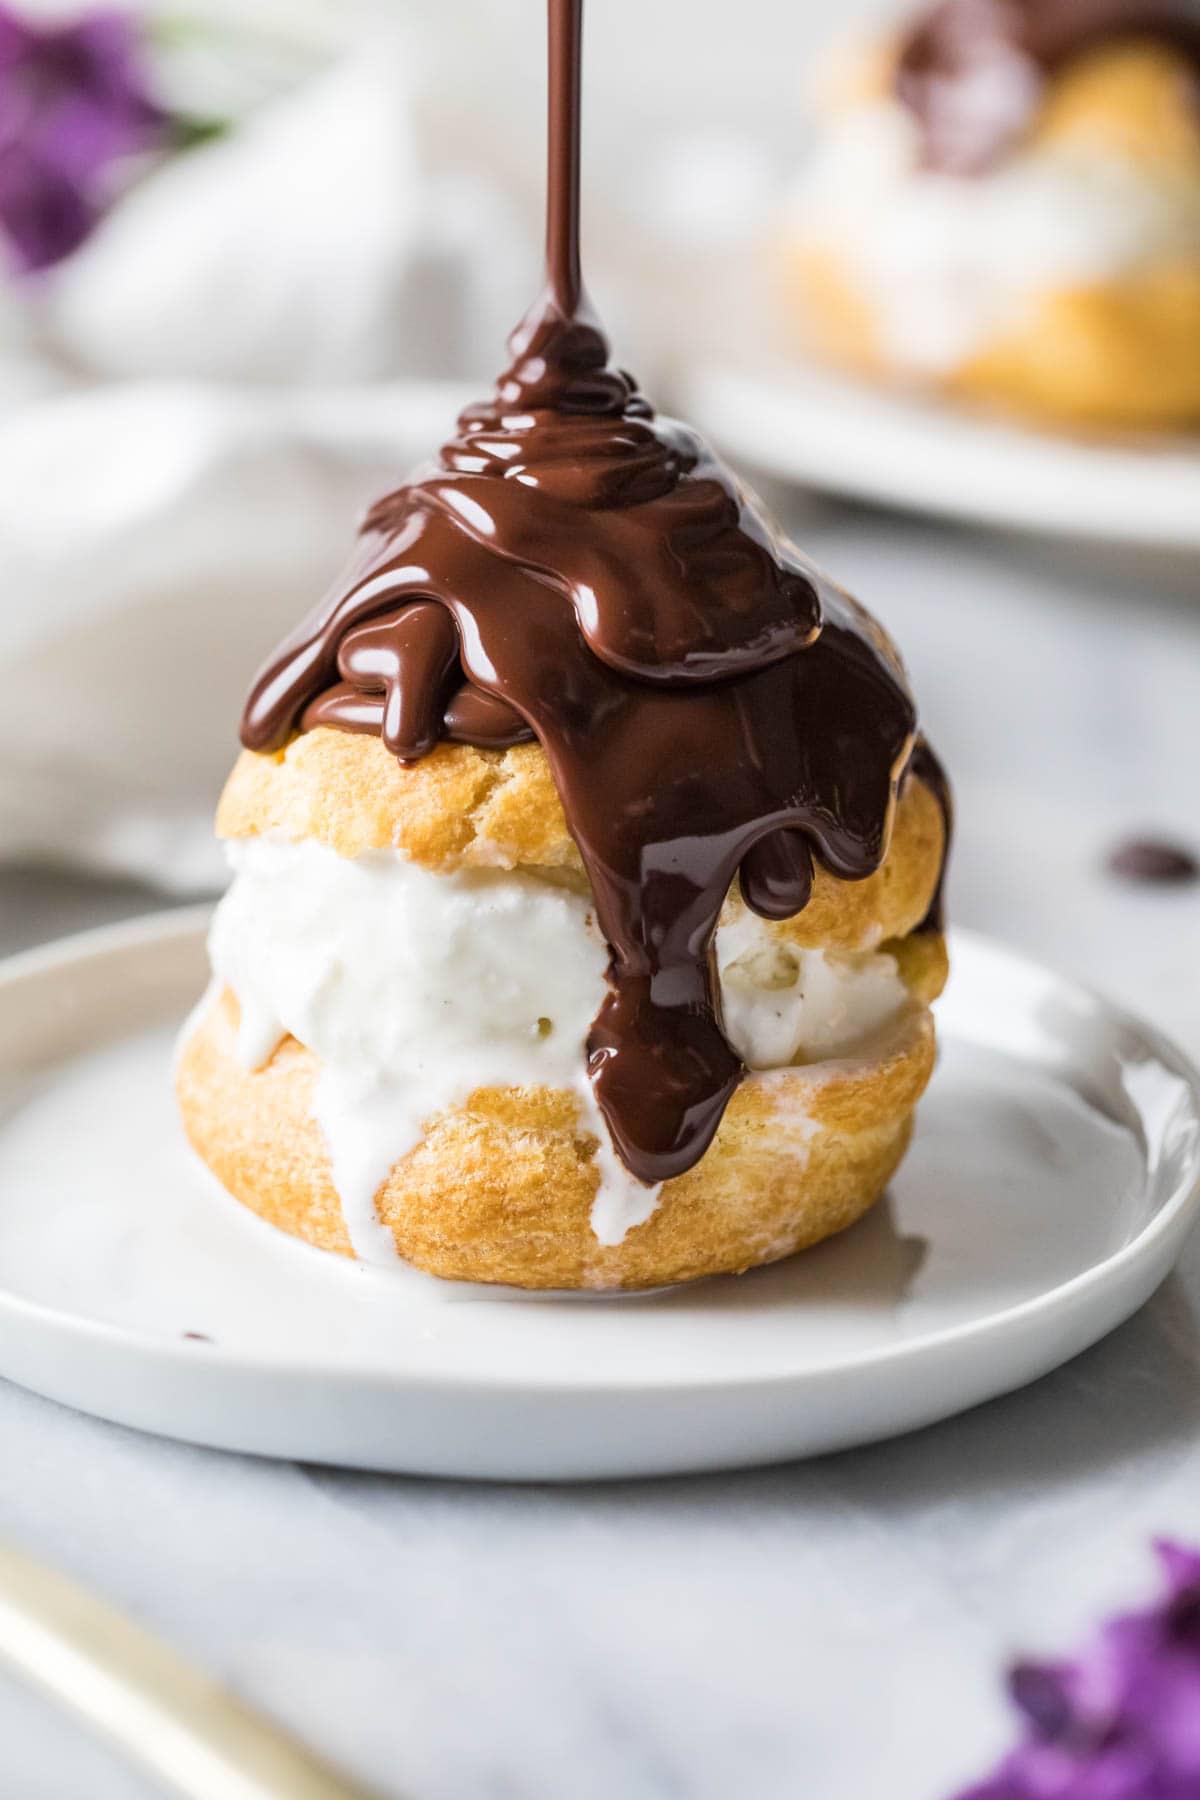 Chocolate ganache being poured on top of a choux bun filled with ice cream.